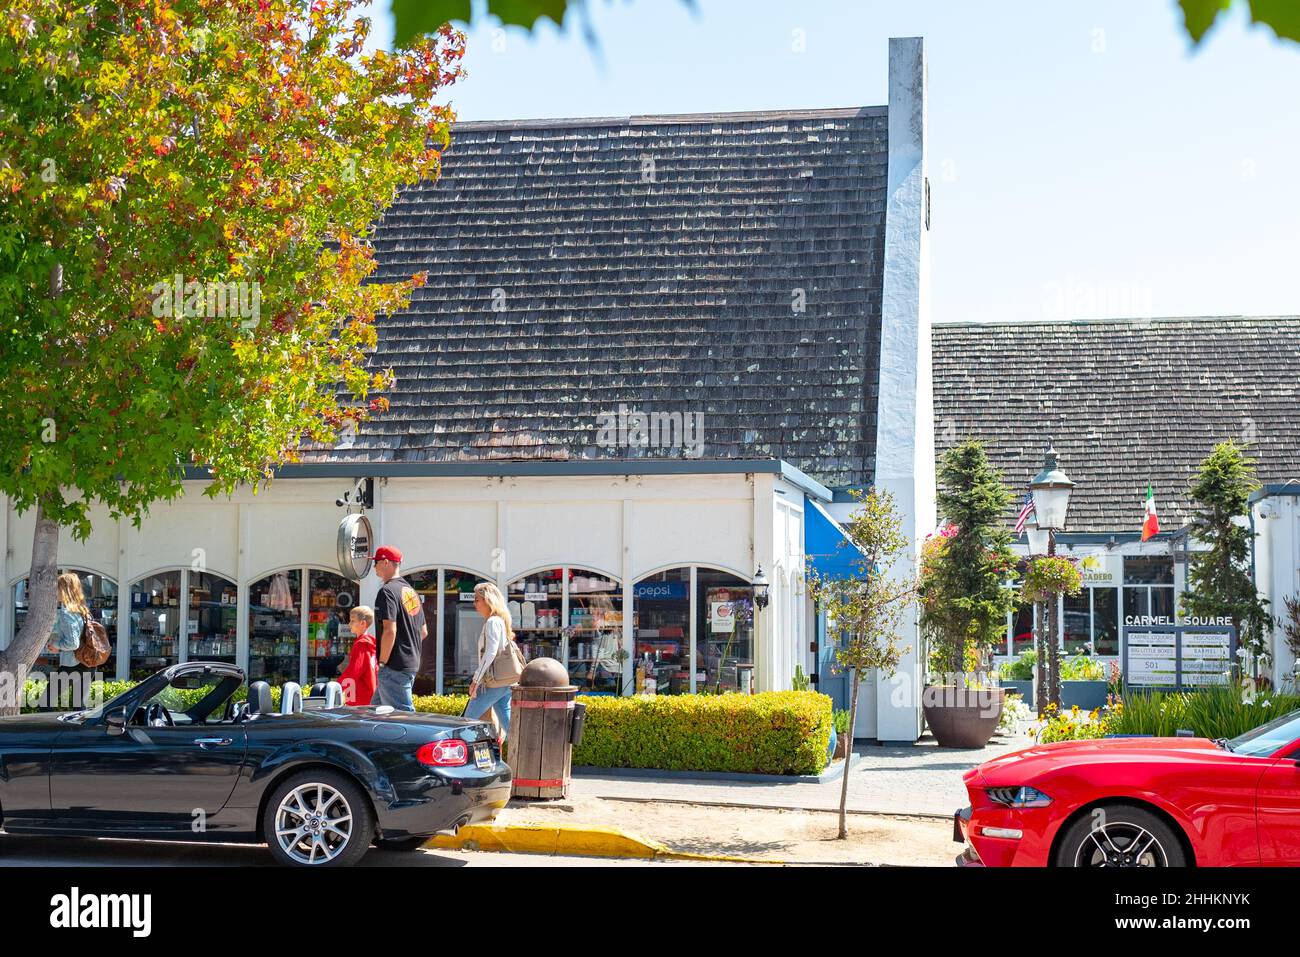 Cars are visible in front of Carmel Plaza shopping area in downtown Carmel, California, September 5, 2021. Photo courtesy Sftm. Stock Photo